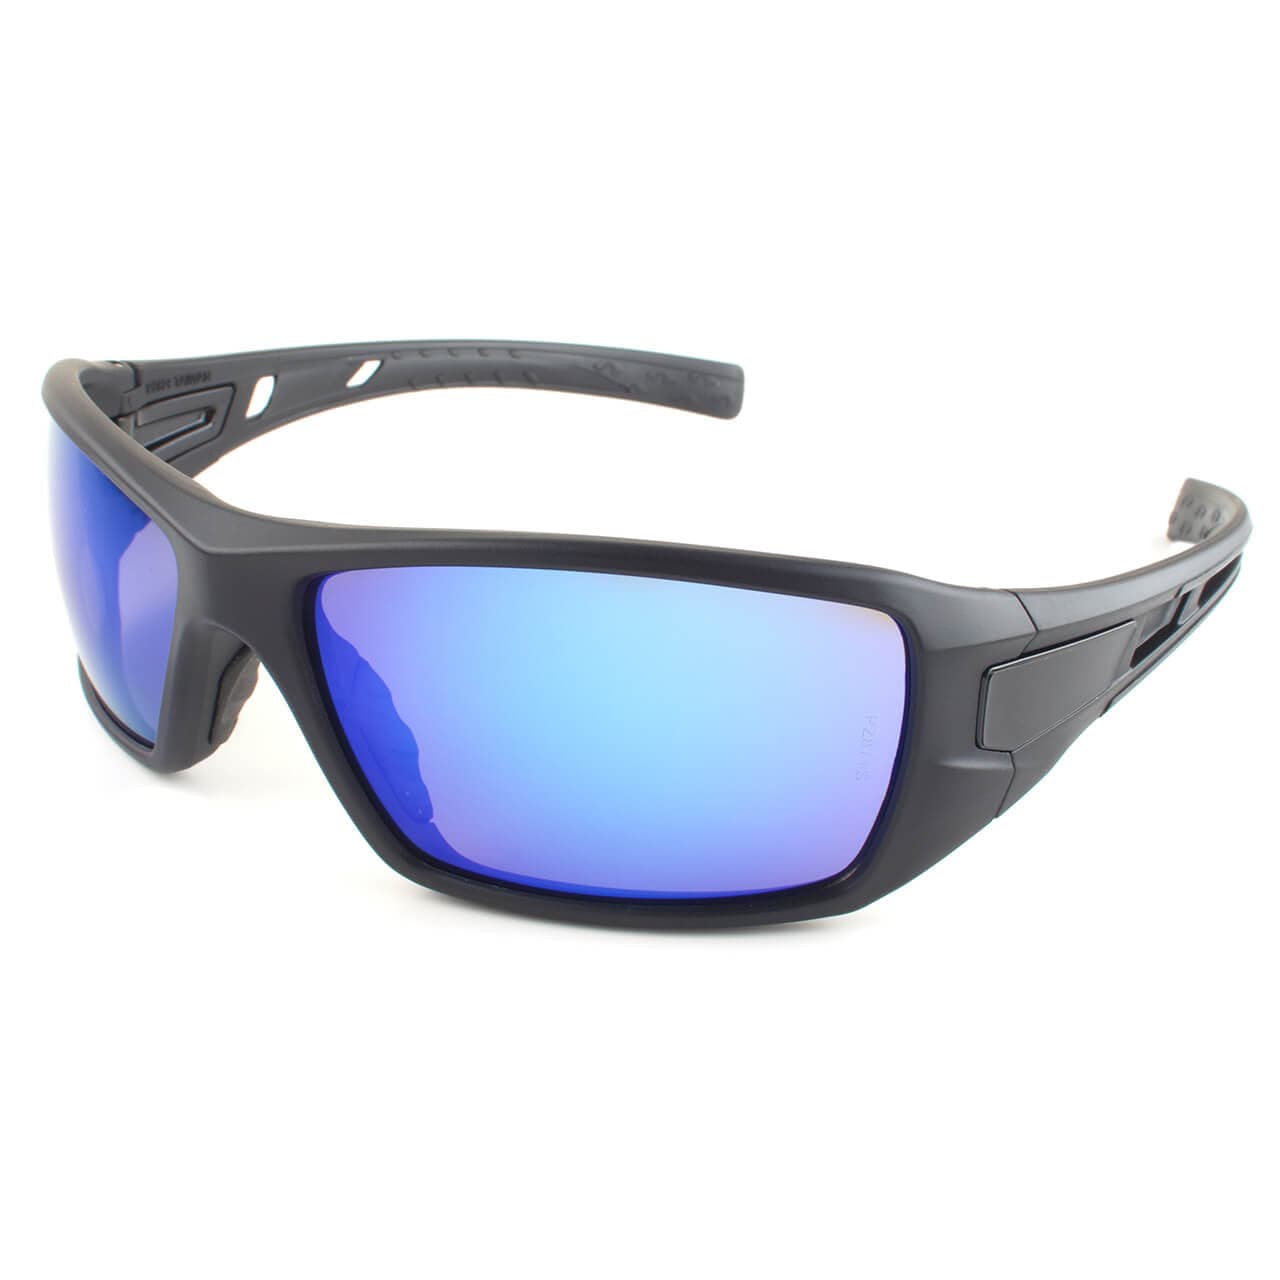 Metel M30 Safety Glasses with Black Frame and Blue Mirror Lenses